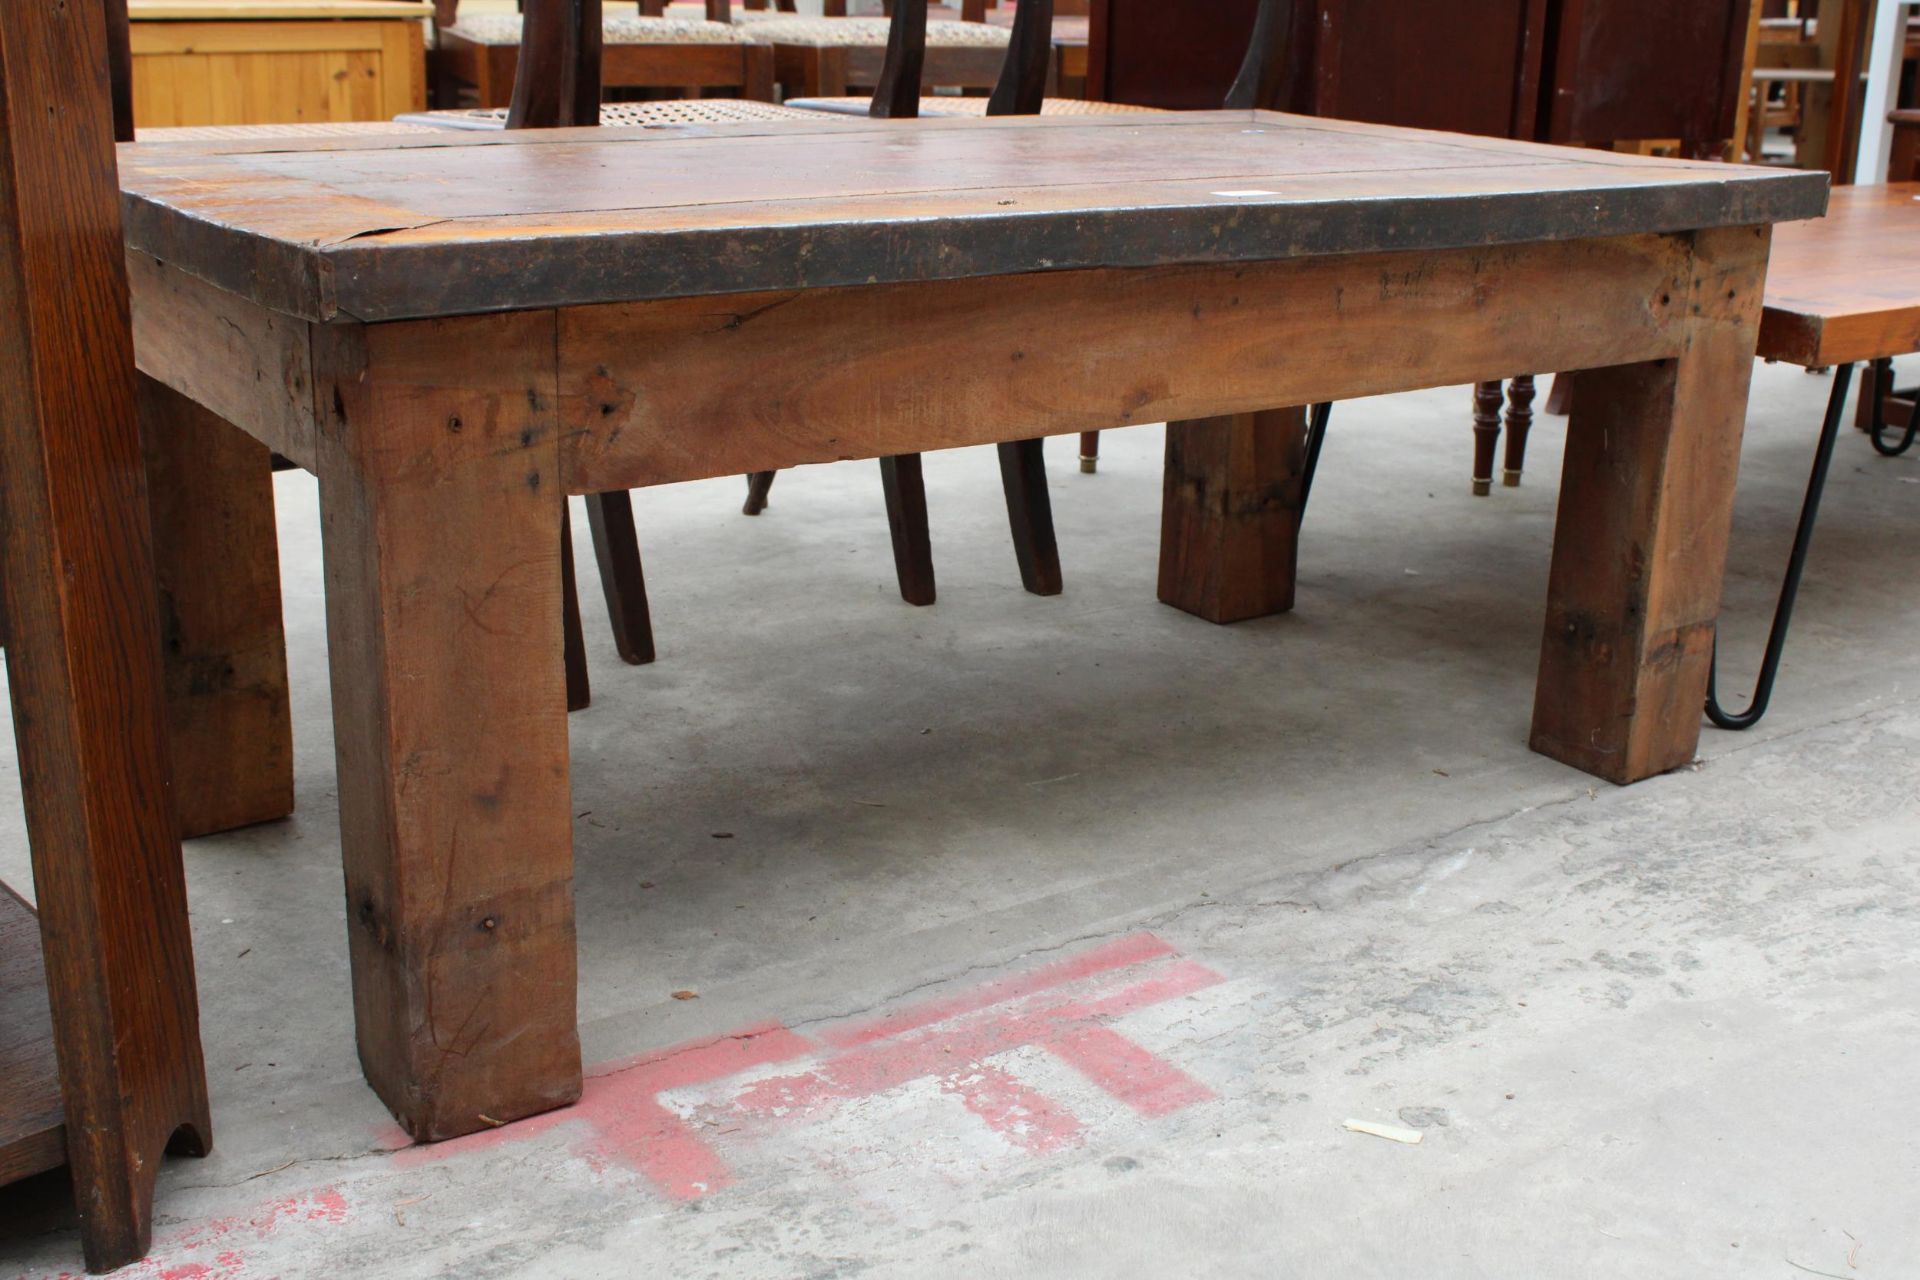 AN INDUSTRIAL STYLE COFFEE TABLE WITH METAL TRIM 43" X 24" AND AN OAK THREE TIER OCCASIONAL TABLE - Image 3 of 4